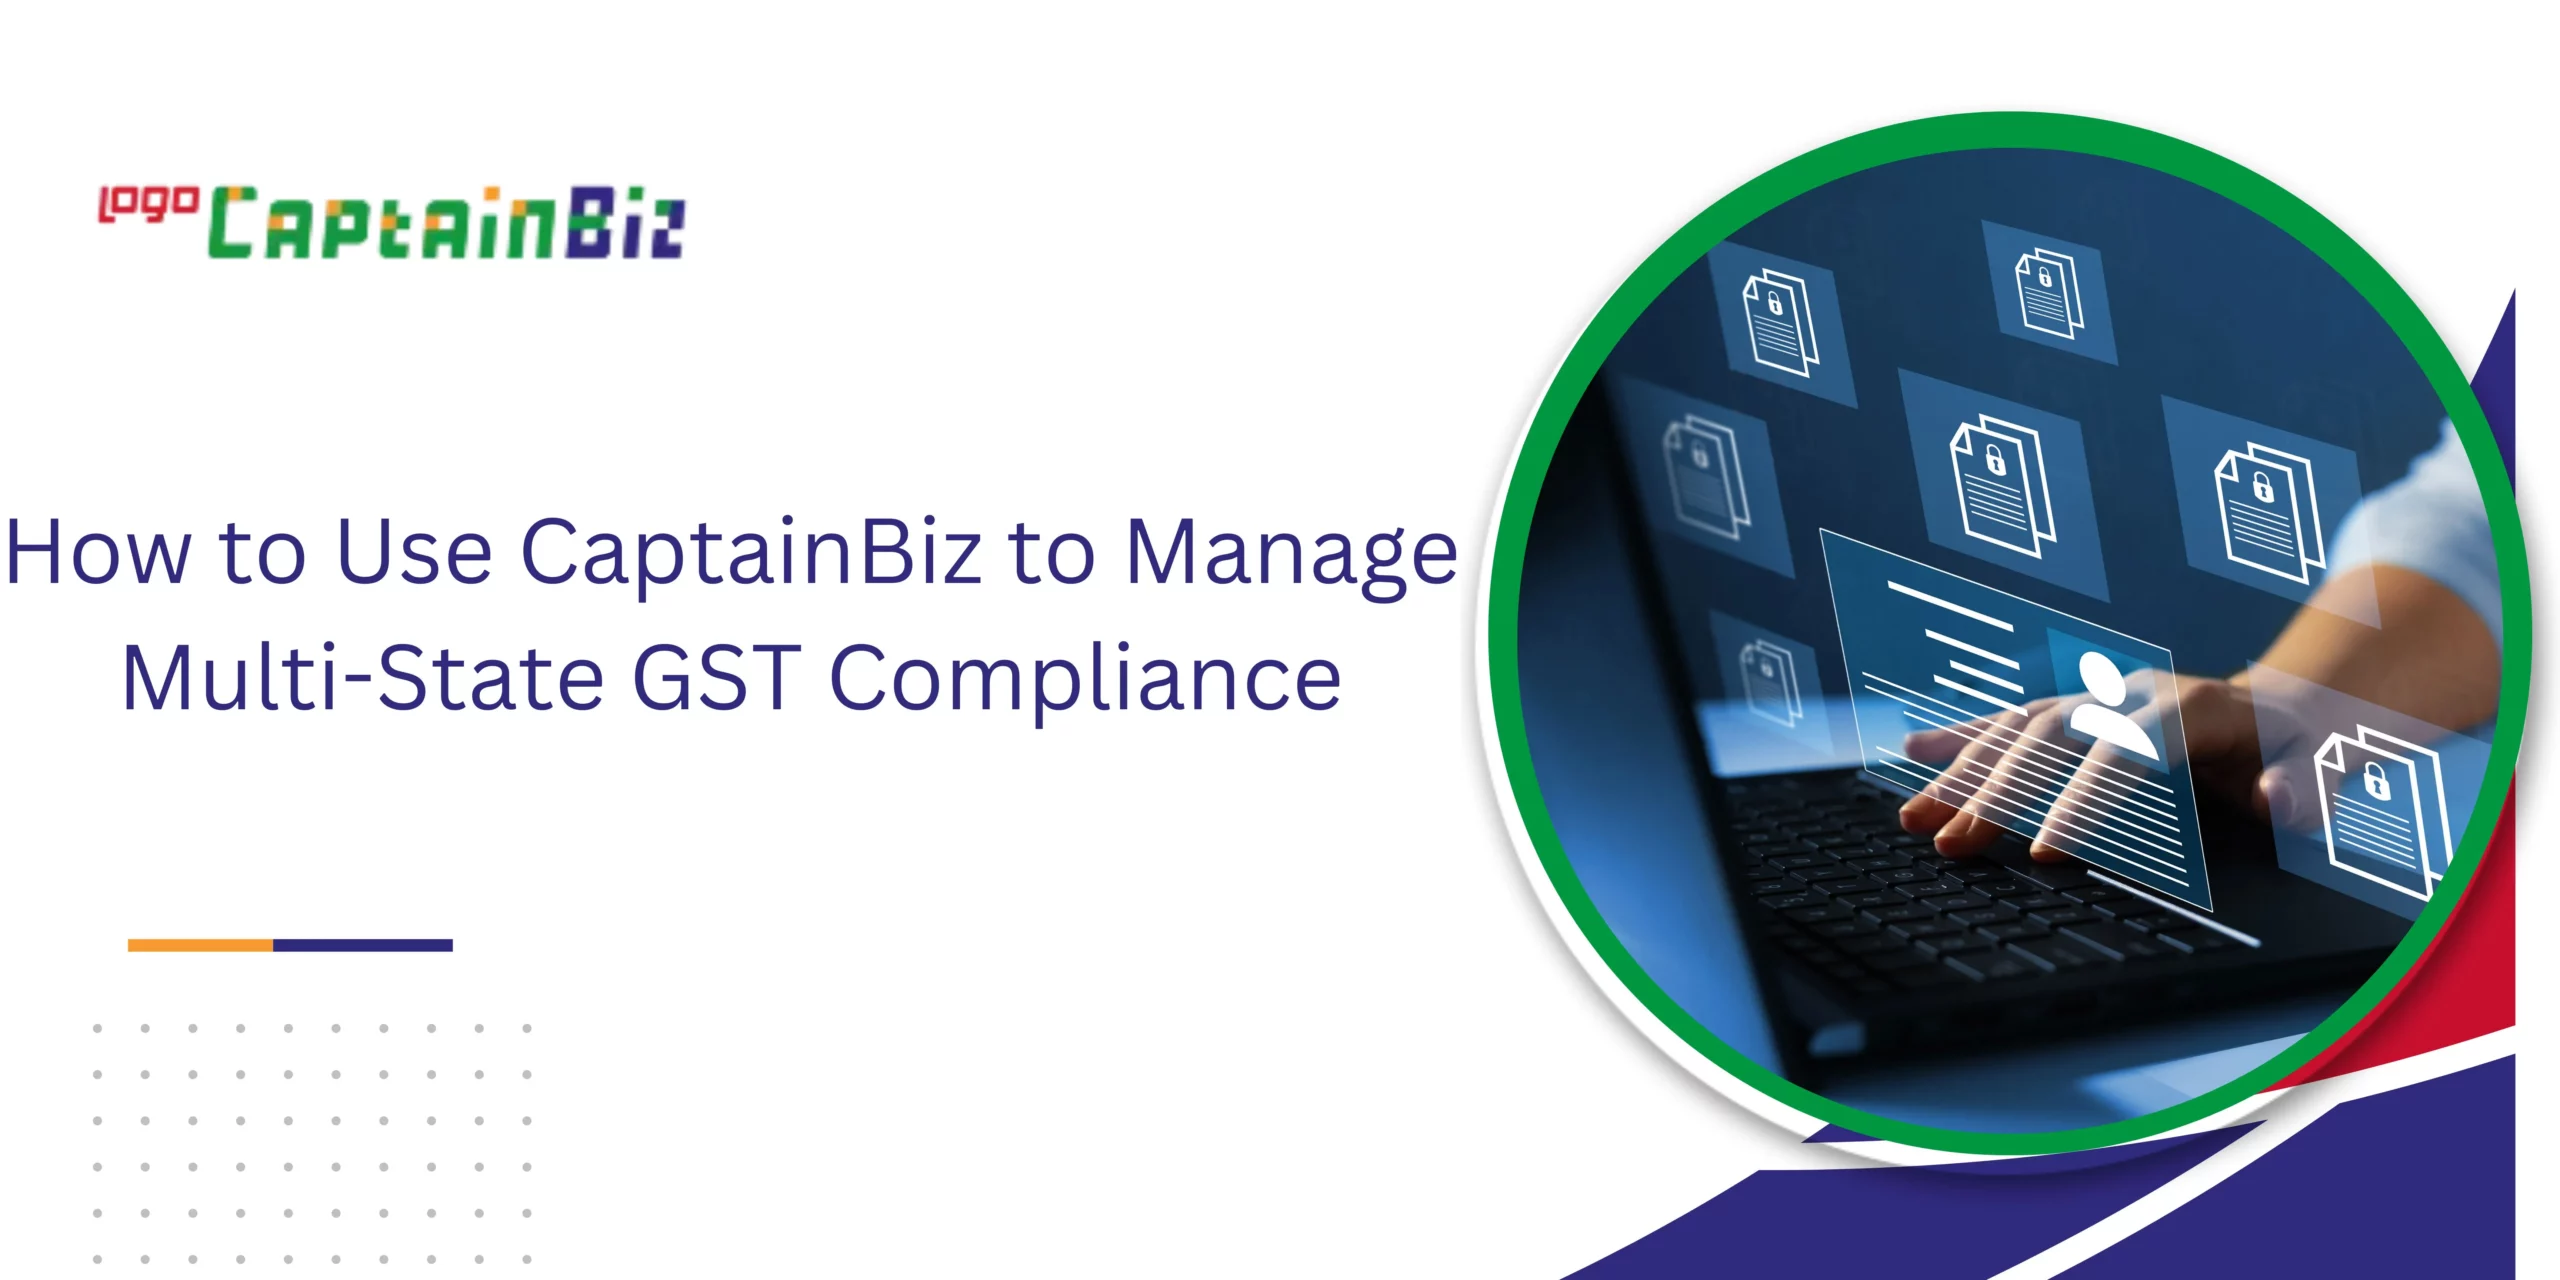 CaptainBiz: How to Use CaptainBiz to Manage Multi-State GST Compliance